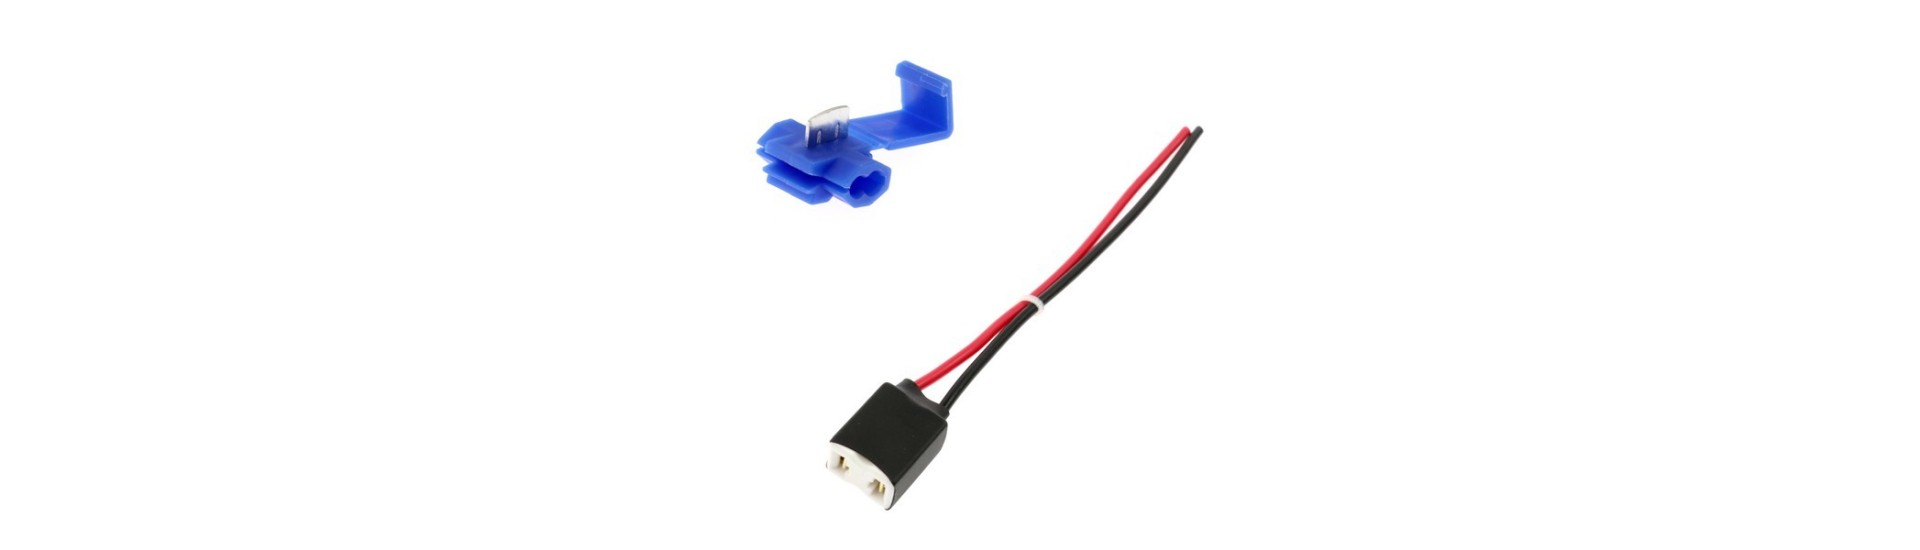 Connector and socks at the best price for car without a permit